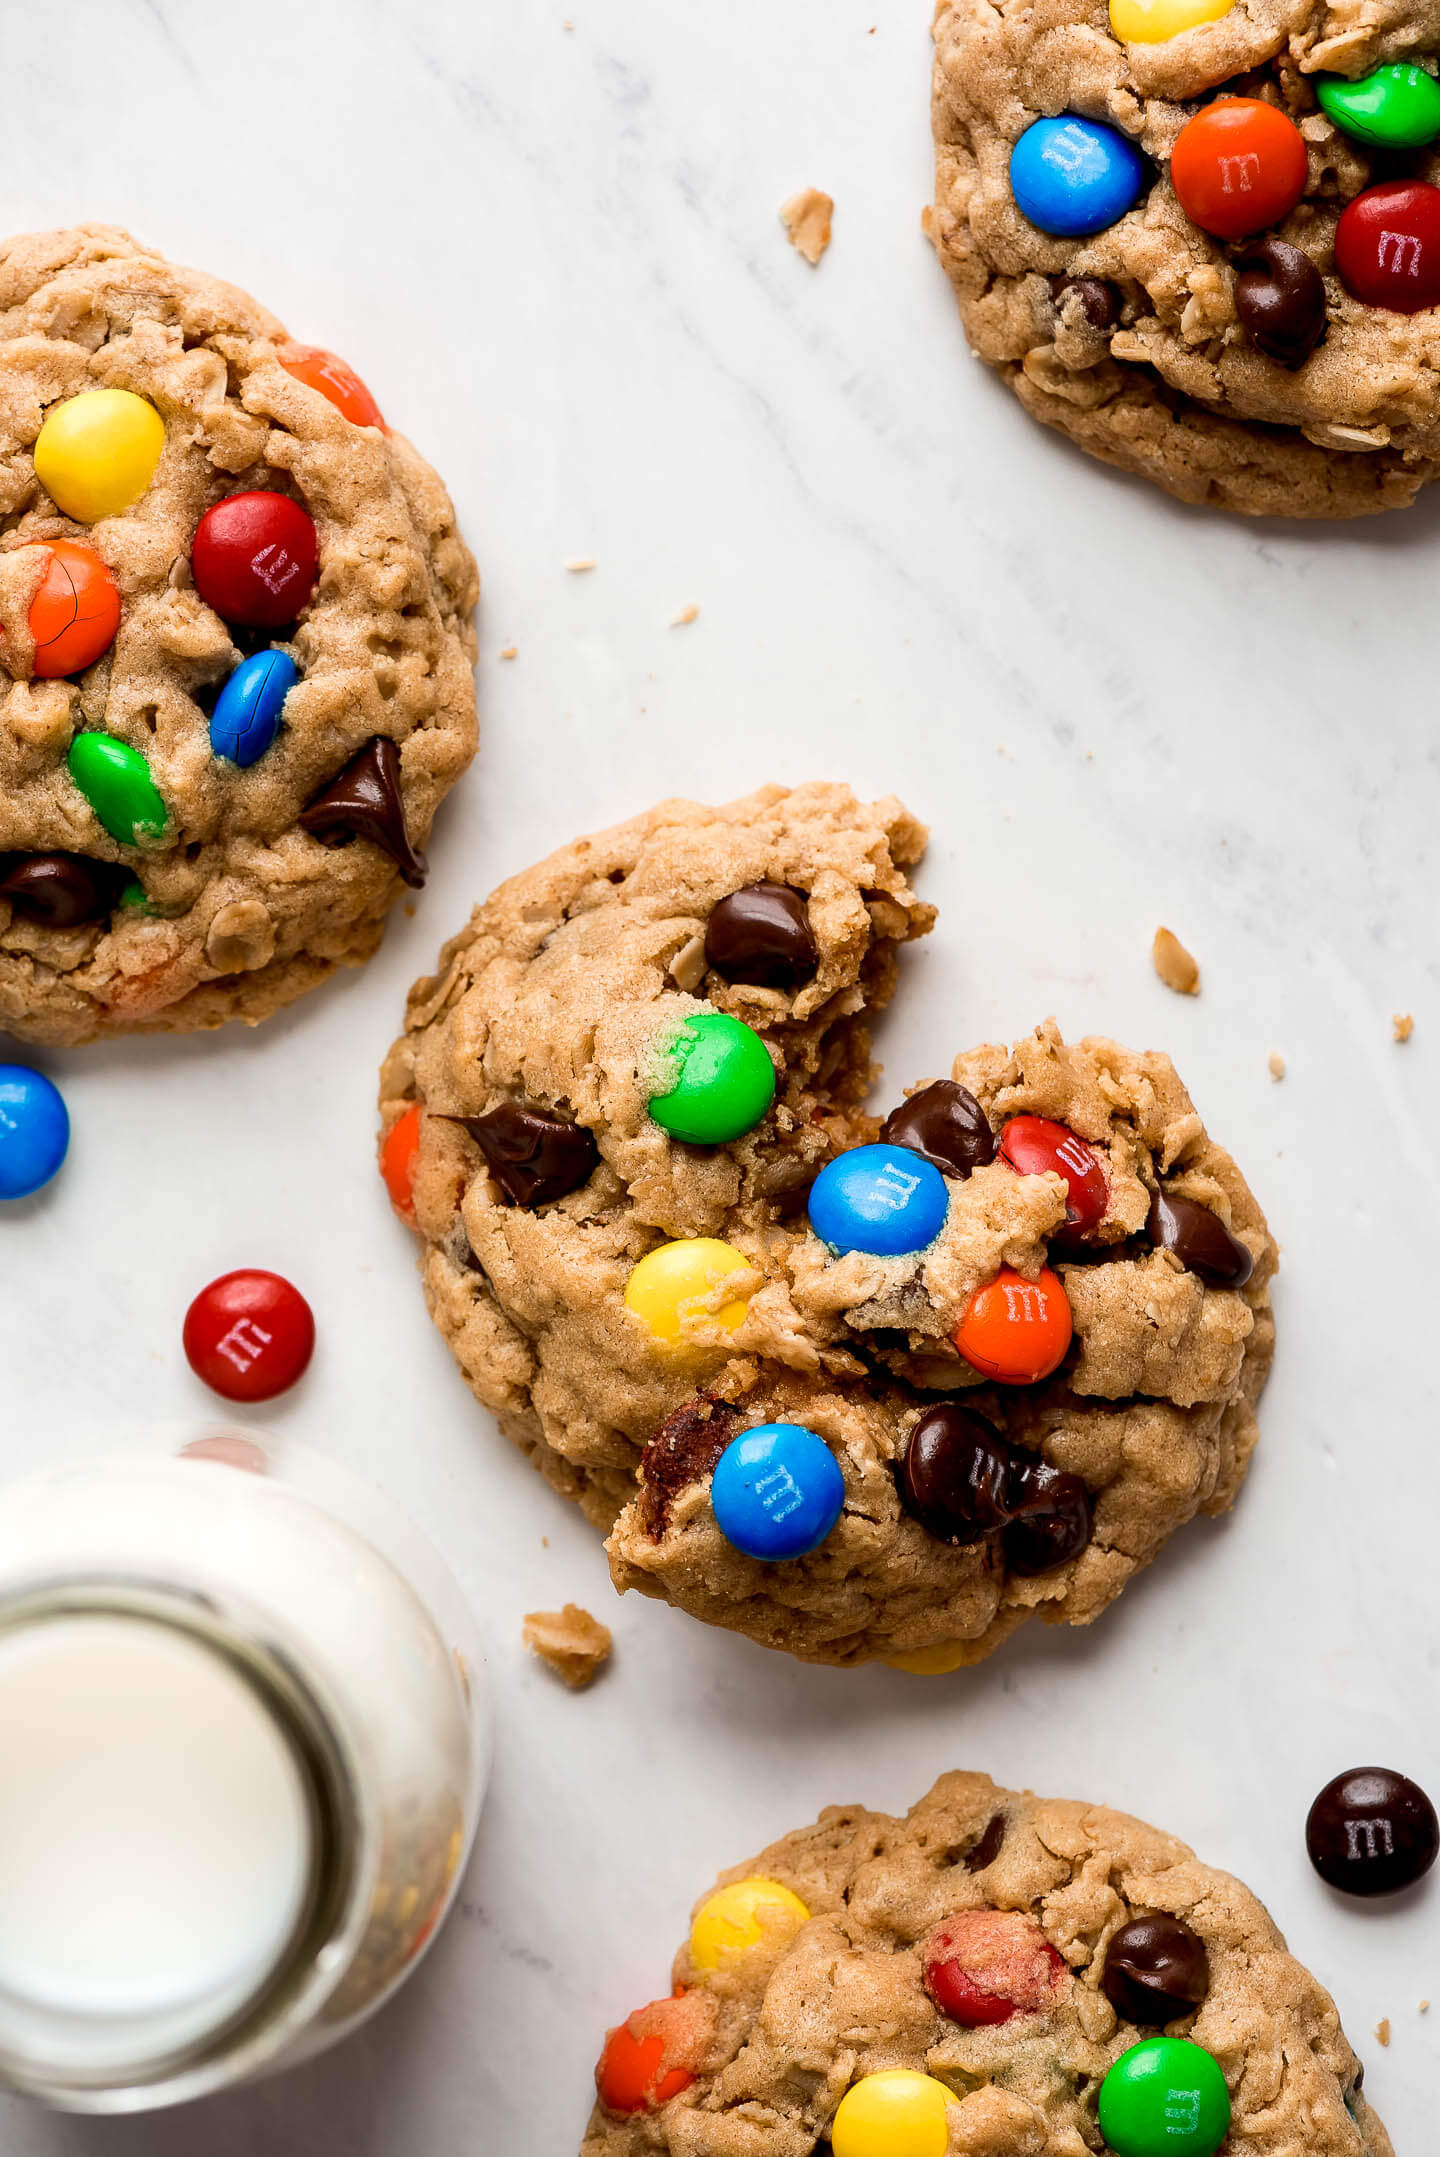 Peanut butter oatmeal cookies with chocolate chips and M&M's pressed into the top and a glass of milk to the side.